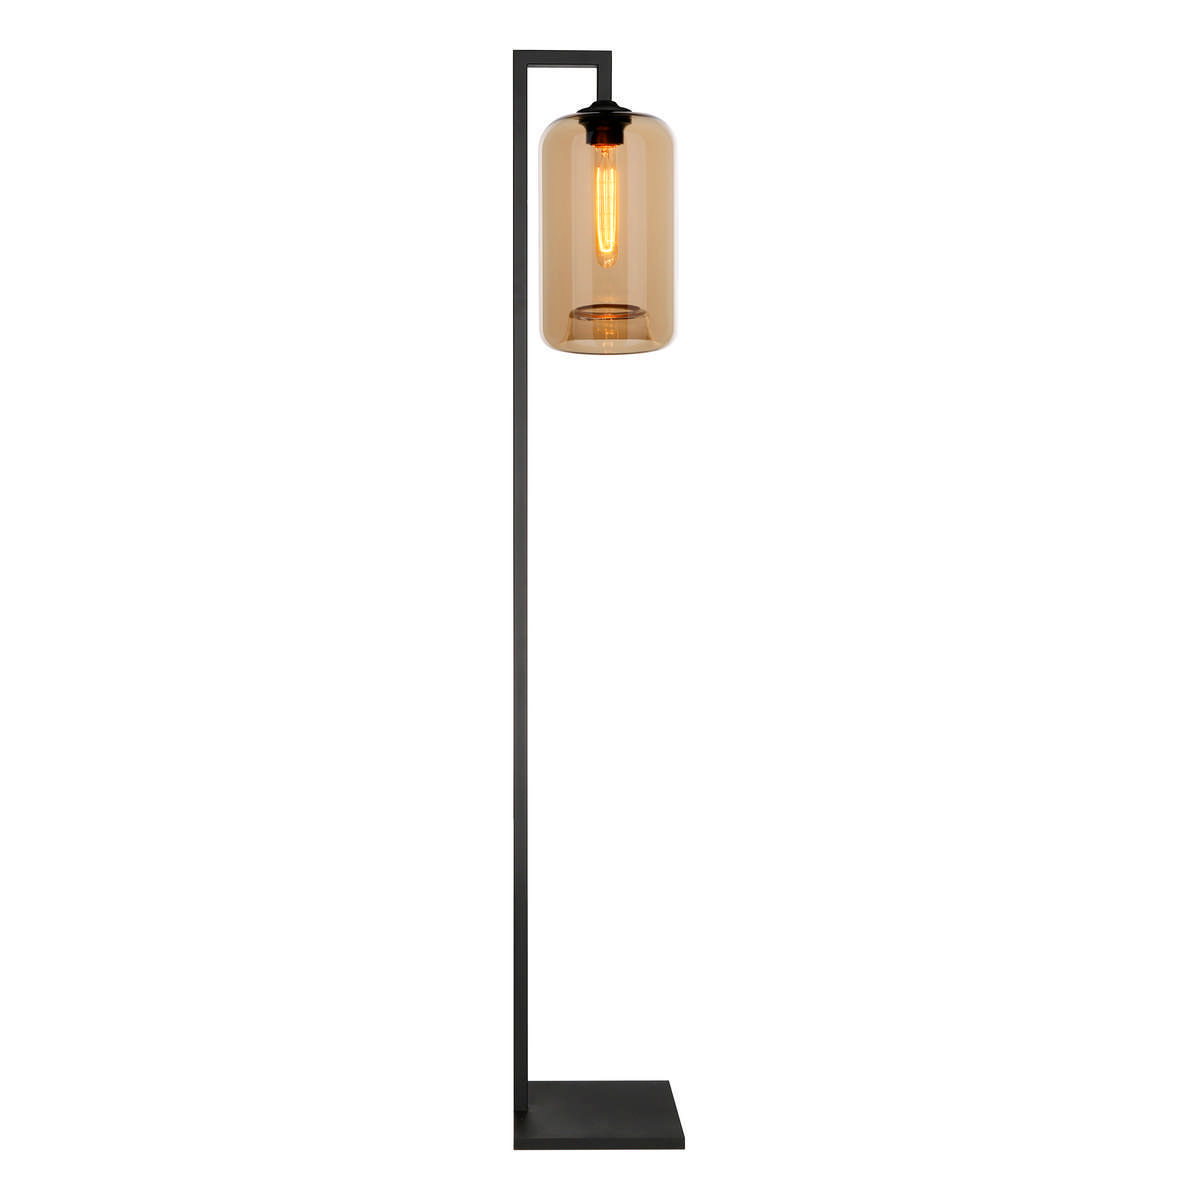 By Eve Eve Stand Down Staande lamp Collectie 4